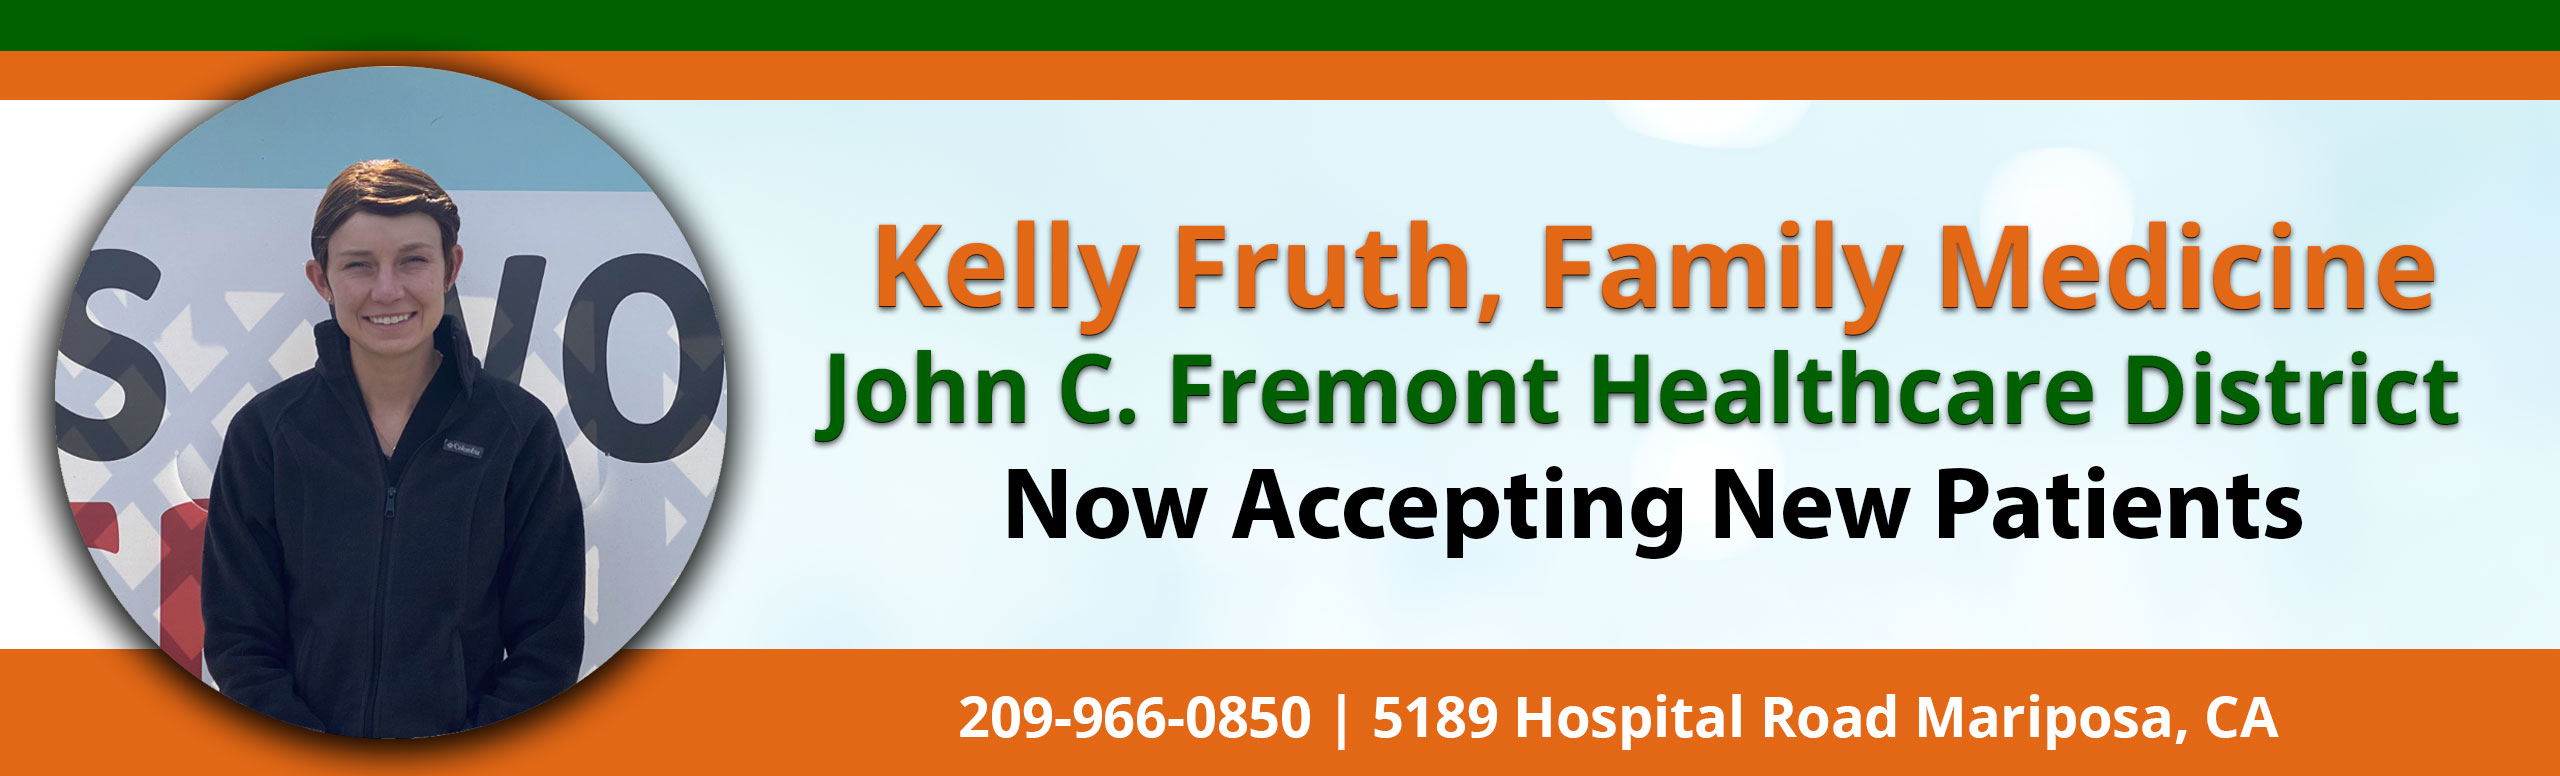 Banner picture of Kelly Fruth smiling. Banner says:

Kelly Fruth, Family Medicine
John C, Fremont Healthcare District
Now Accepting New Patients

209-966-0850 | 5189 Hospital Road Mariposa, CA